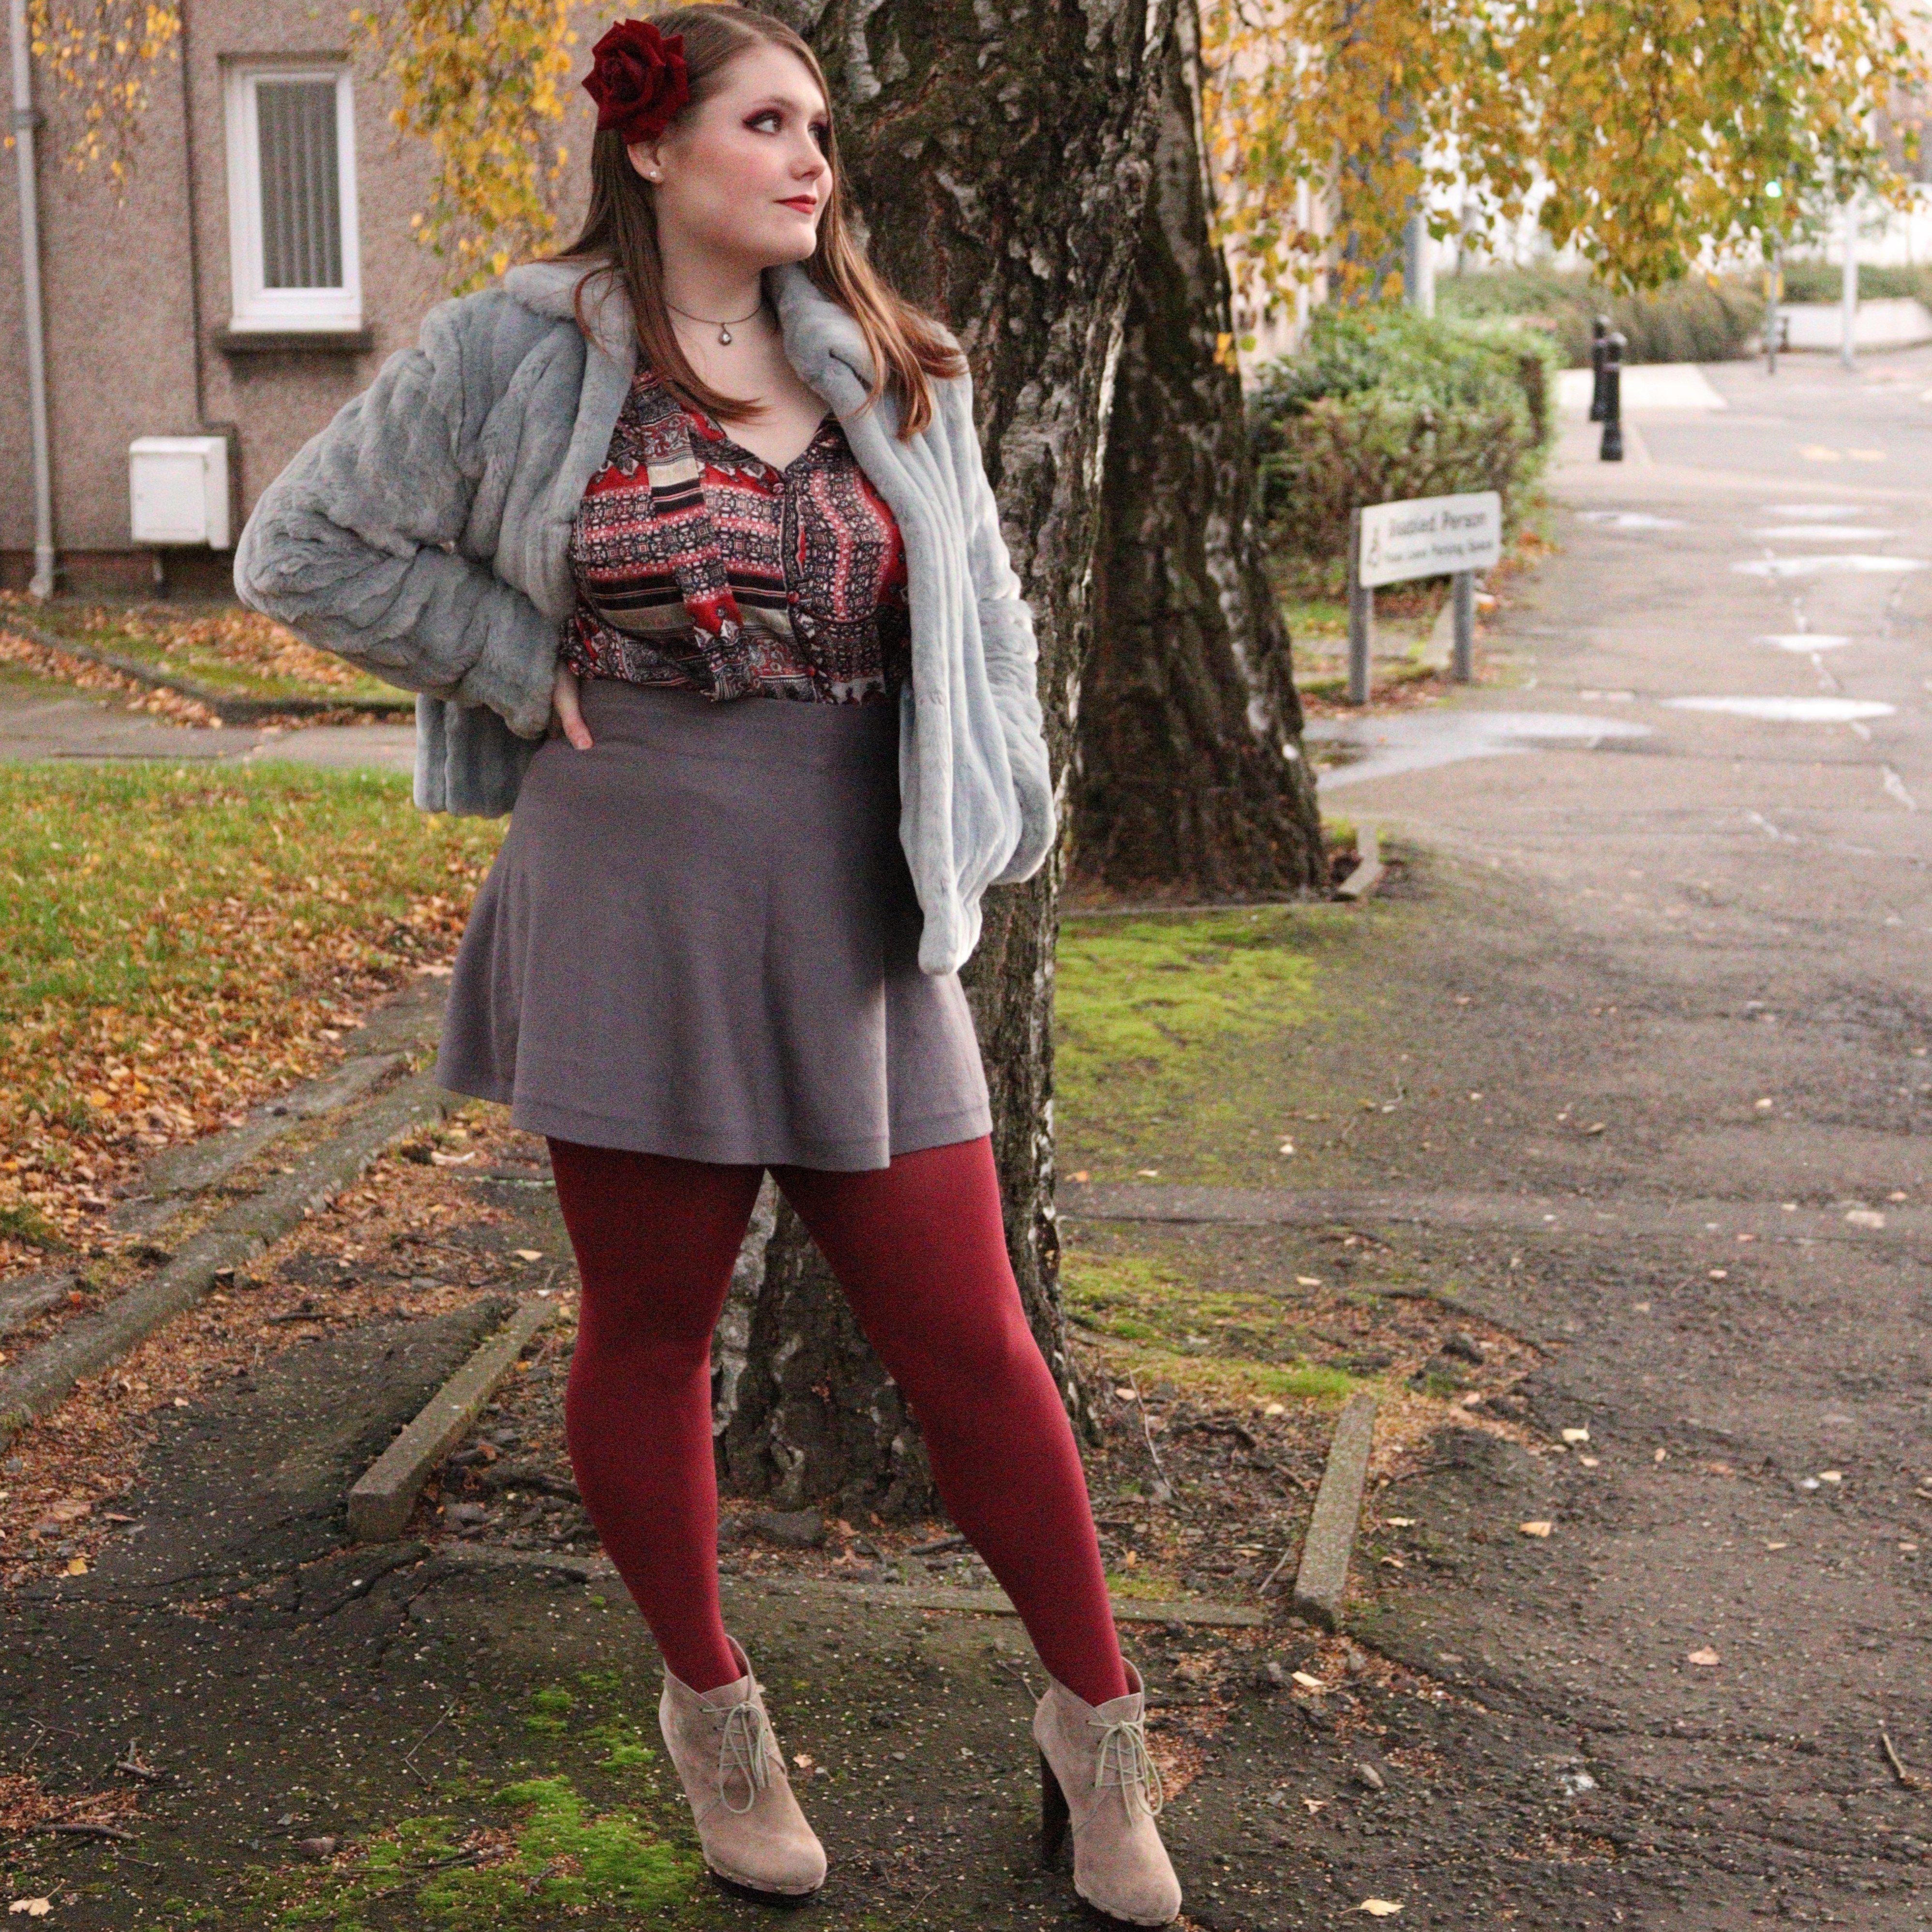 Burgundy Comfy 80D Tights – From Rachel